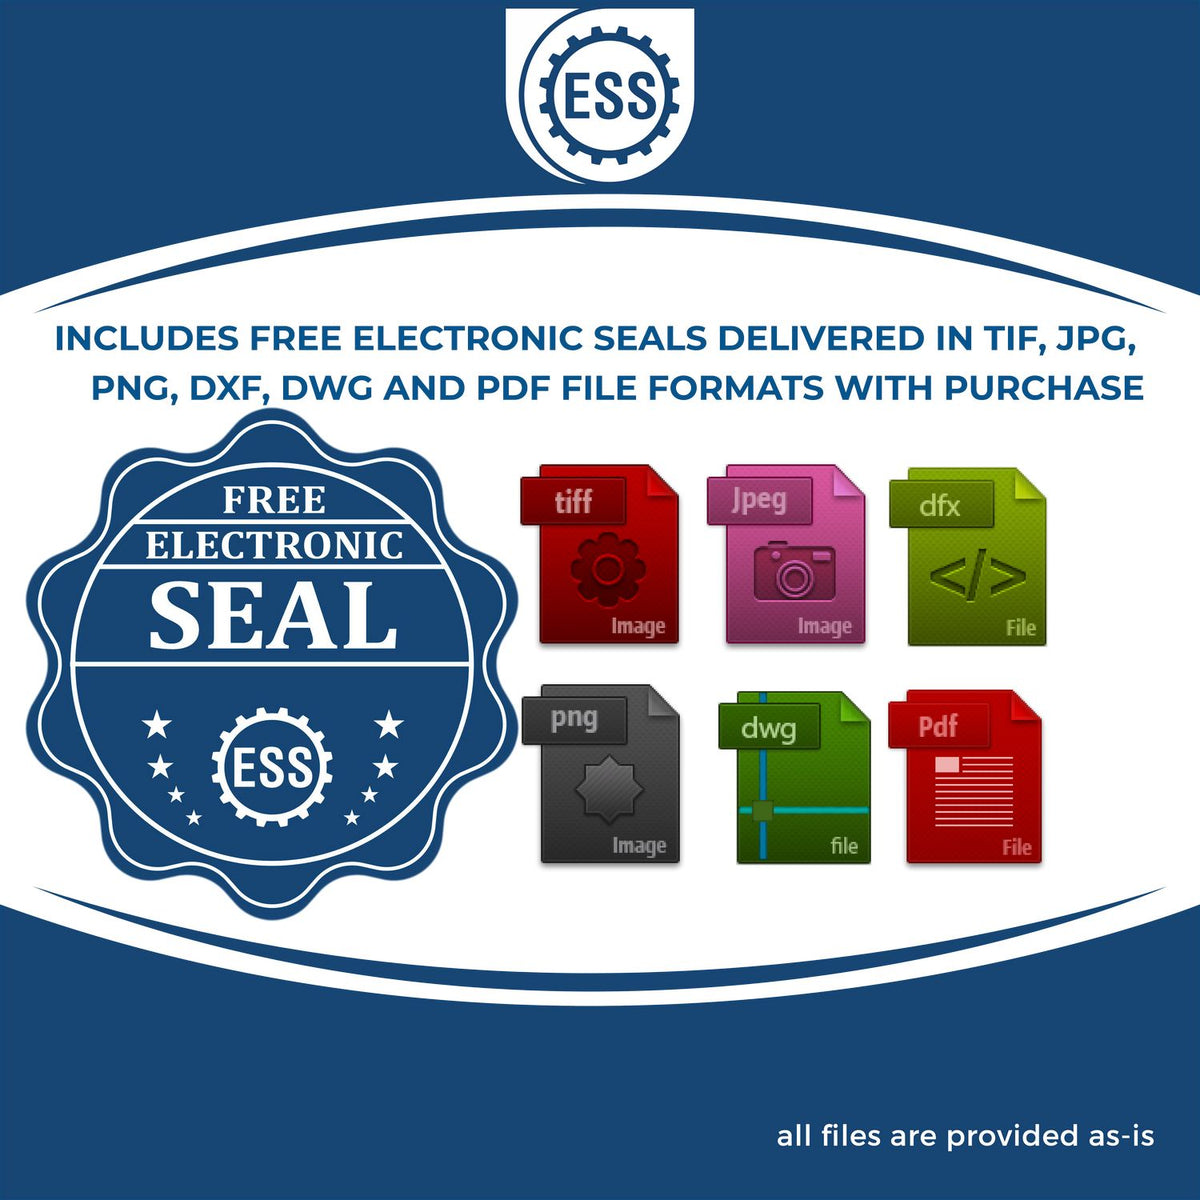 An infographic for the free electronic seal for the MaxLight Premium Pre-Inked Illinois Rectangular Notarial Stamp illustrating the different file type icons such as DXF, DWG, TIF, JPG and PNG.